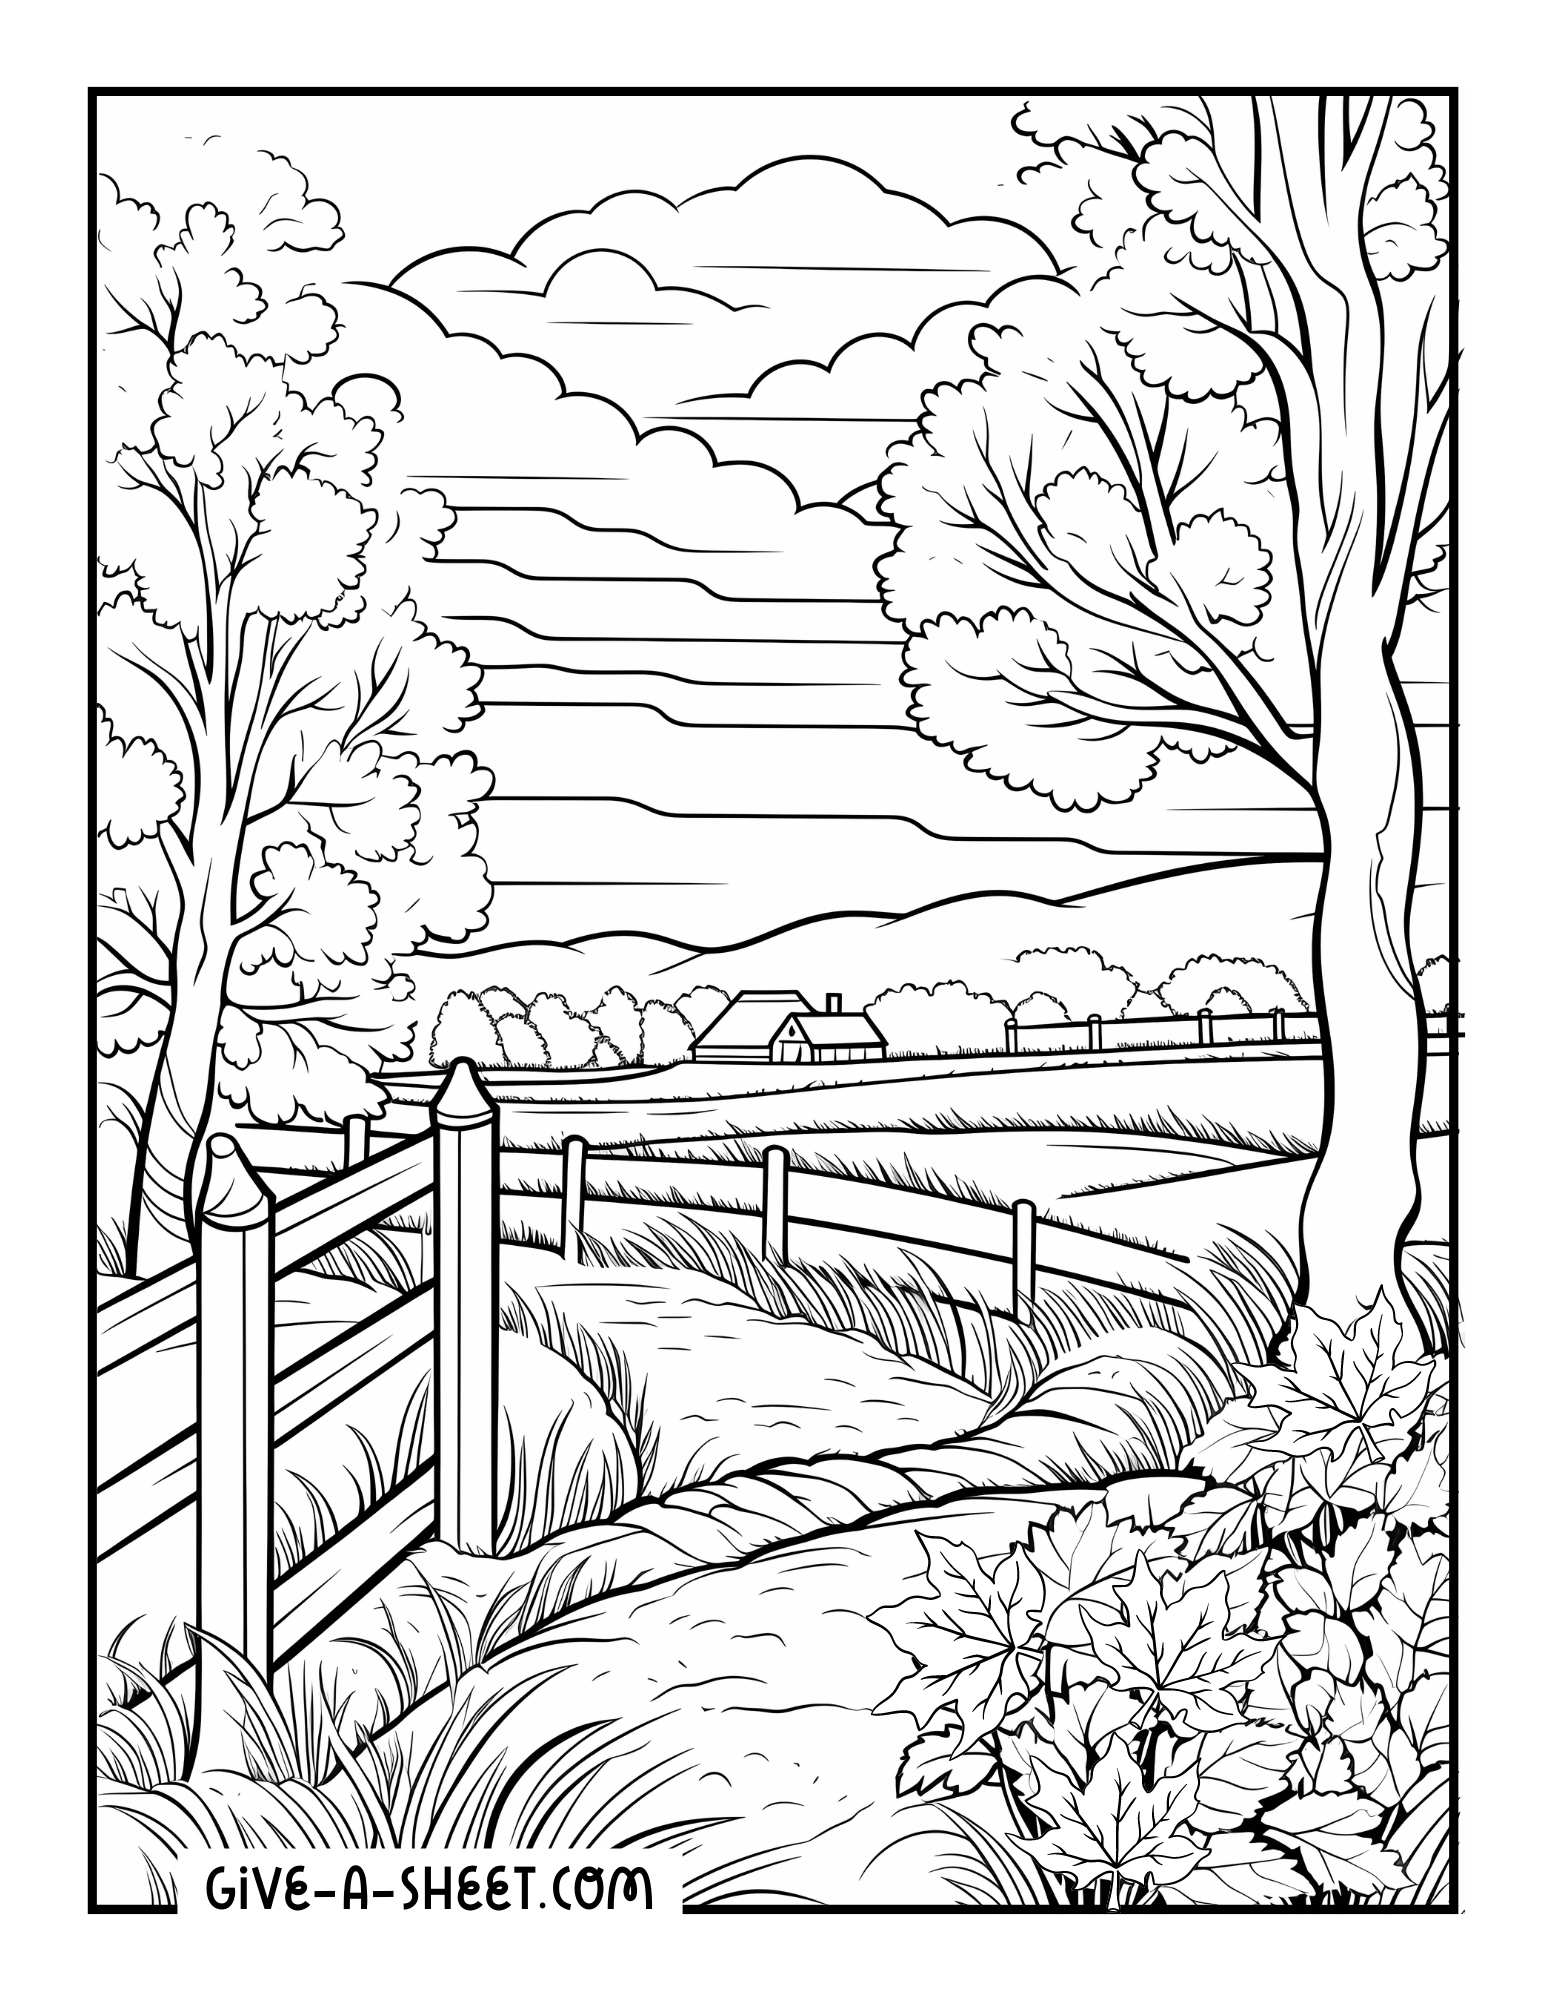 Autumn themes coloring page for kids.